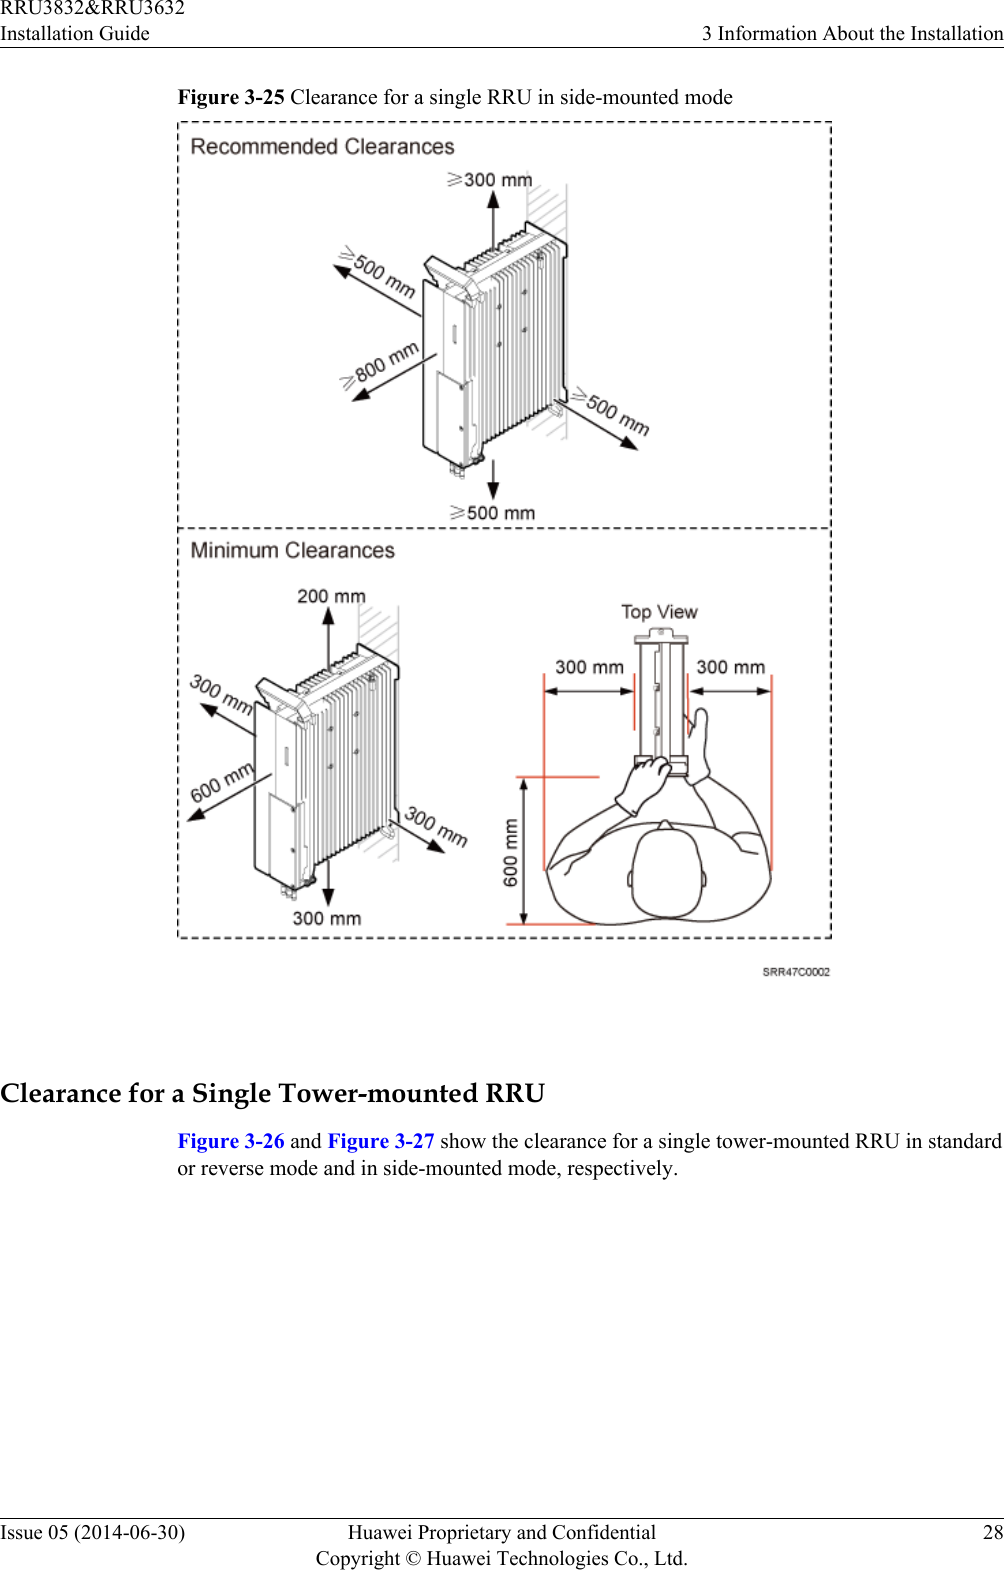 Figure 3-25 Clearance for a single RRU in side-mounted mode Clearance for a Single Tower-mounted RRUFigure 3-26 and Figure 3-27 show the clearance for a single tower-mounted RRU in standardor reverse mode and in side-mounted mode, respectively.RRU3832&amp;RRU3632Installation Guide 3 Information About the InstallationIssue 05 (2014-06-30) Huawei Proprietary and ConfidentialCopyright © Huawei Technologies Co., Ltd.28